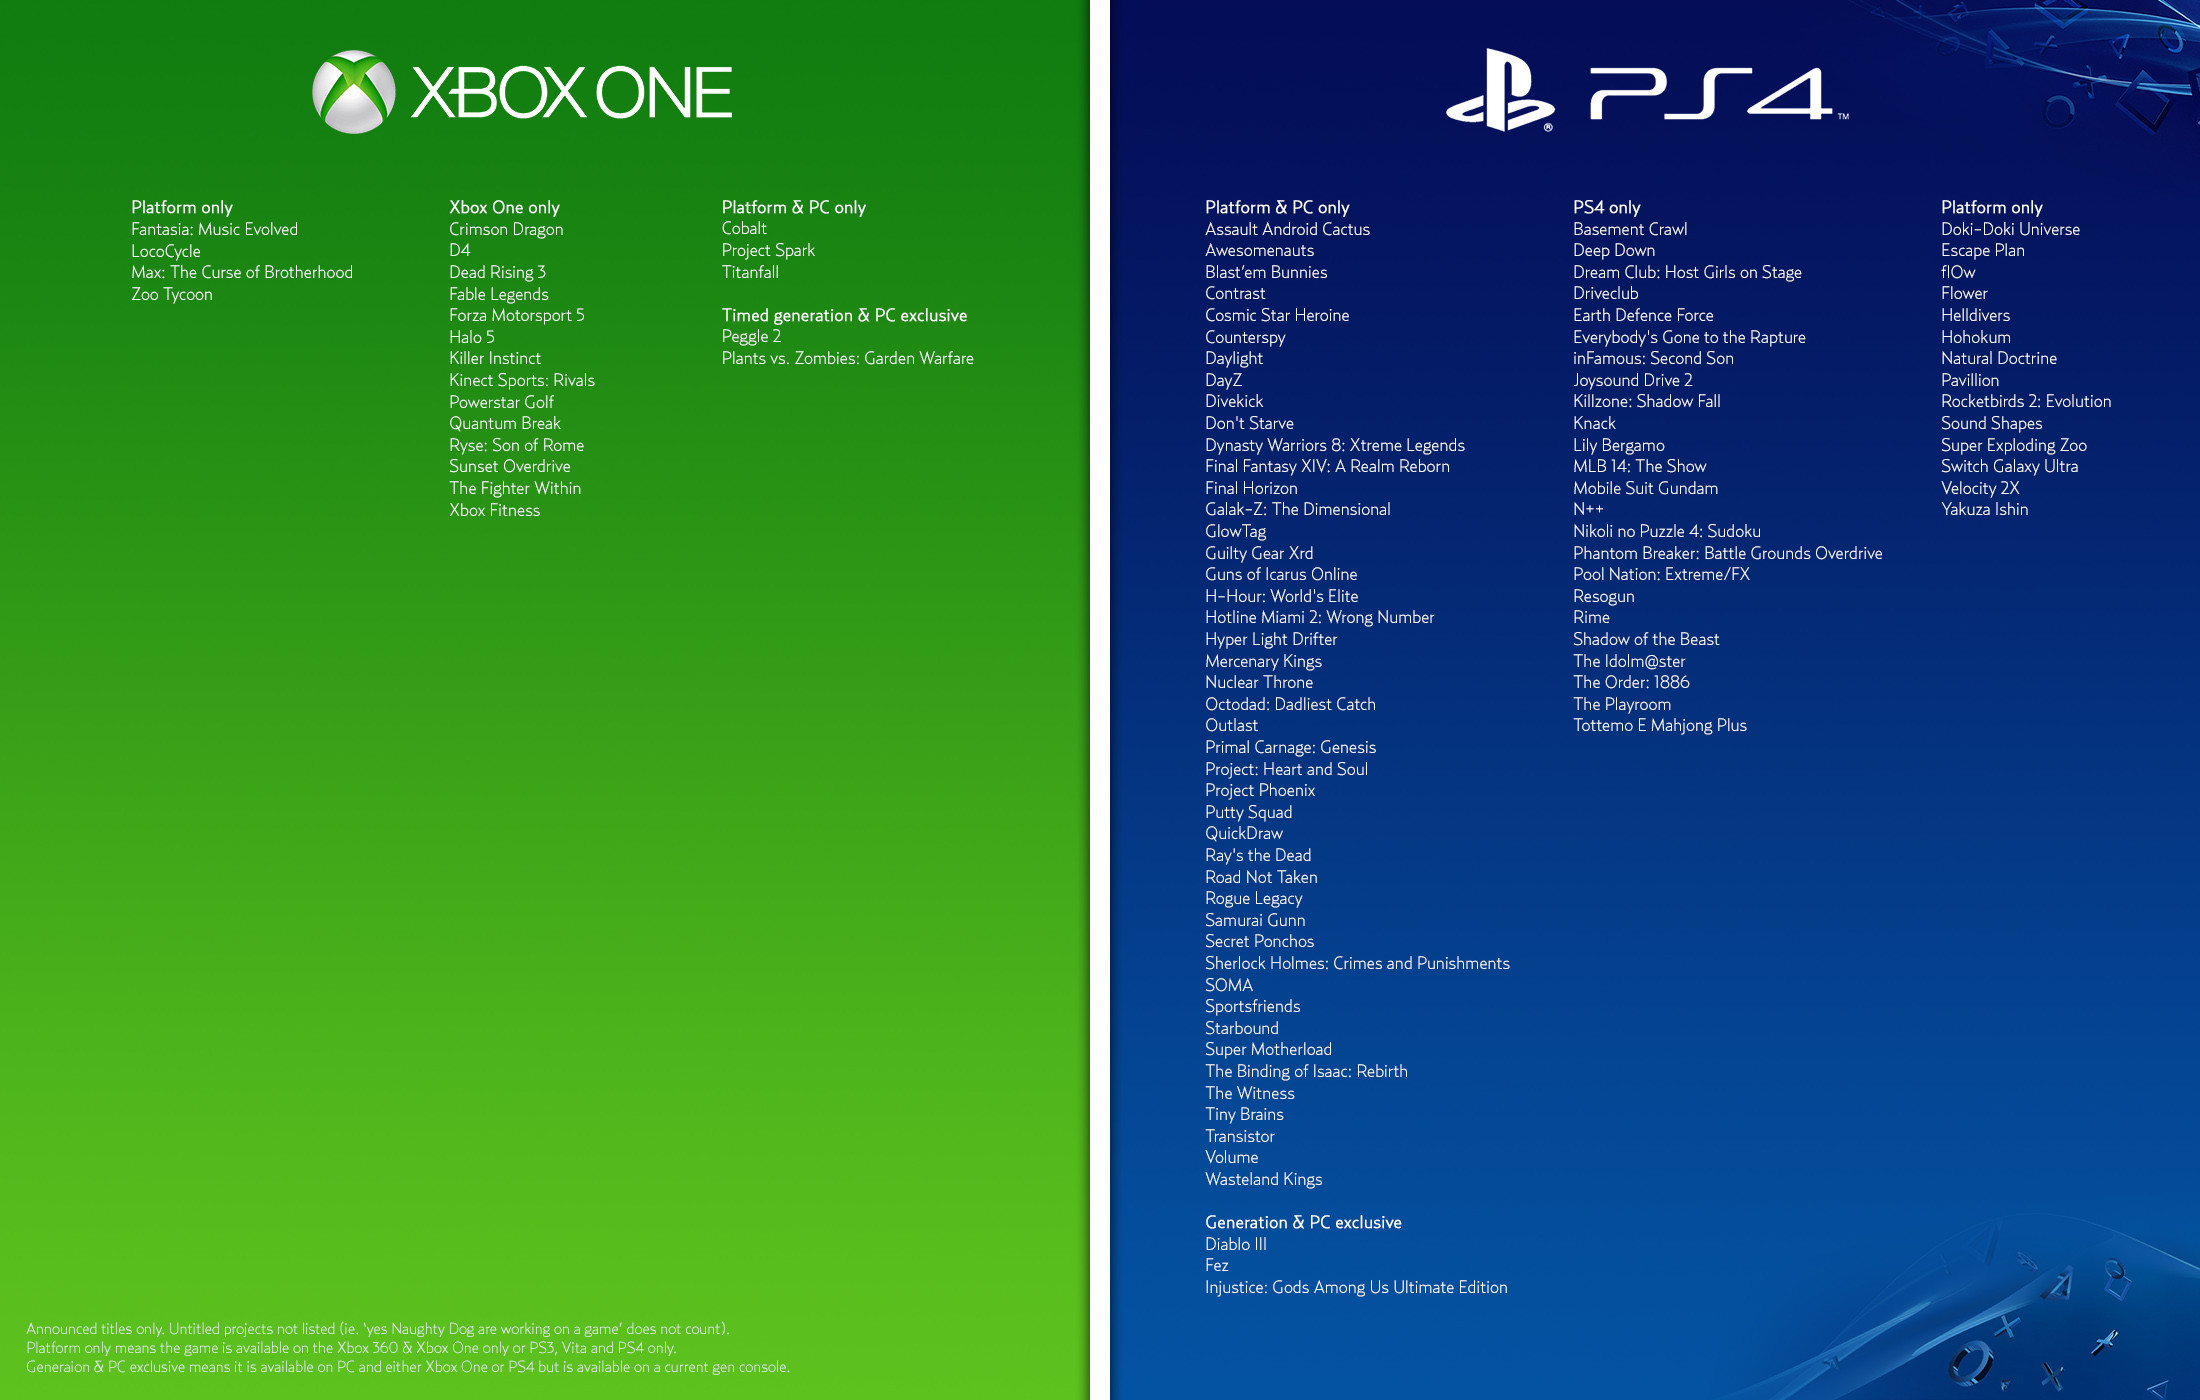 Petition · PS4 exclusives come to XBOX ·